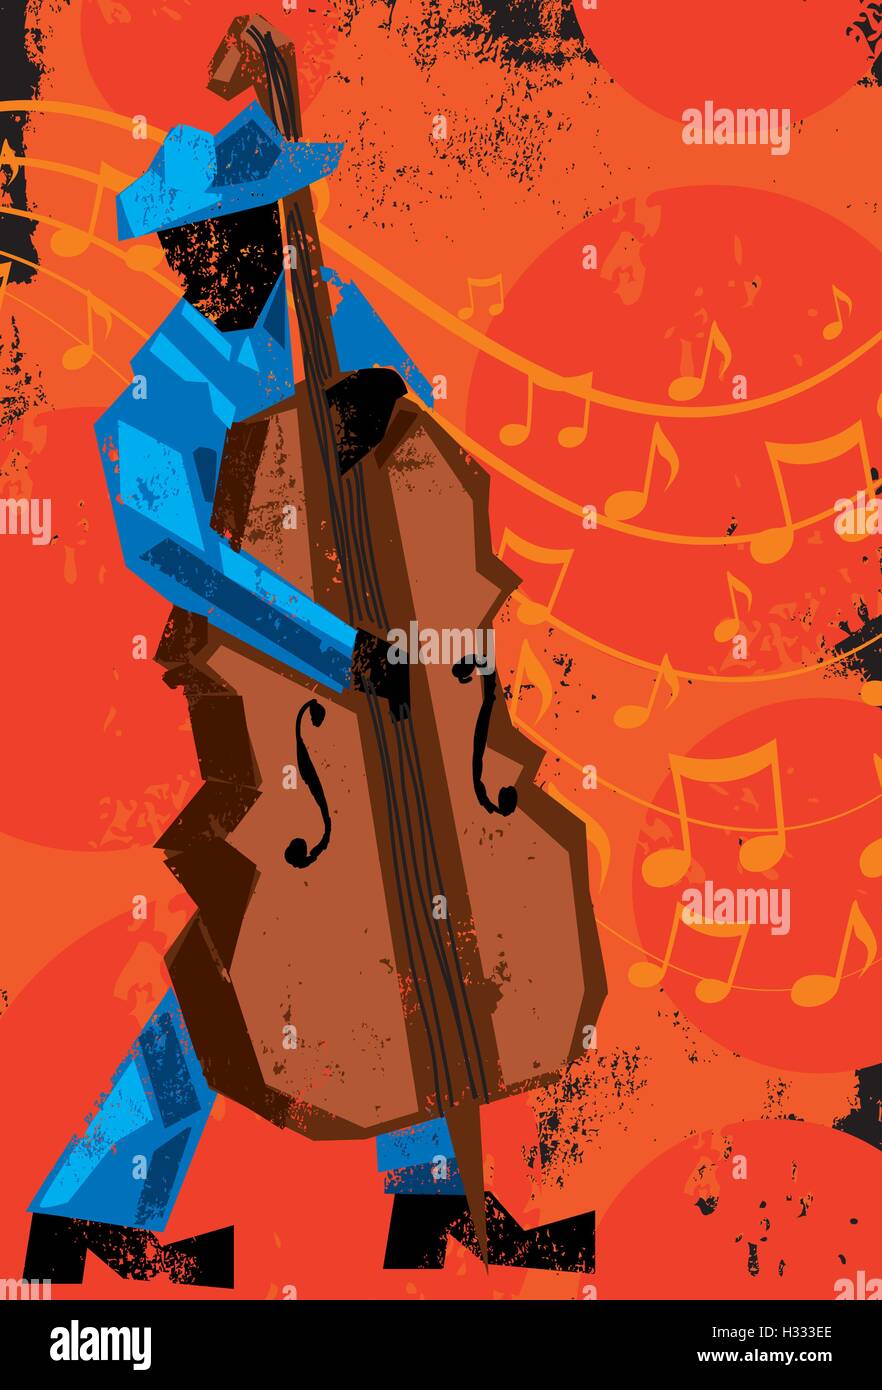 Jazz double bass player  A double bass player in front of music notes over a decorative background. Stock Vector